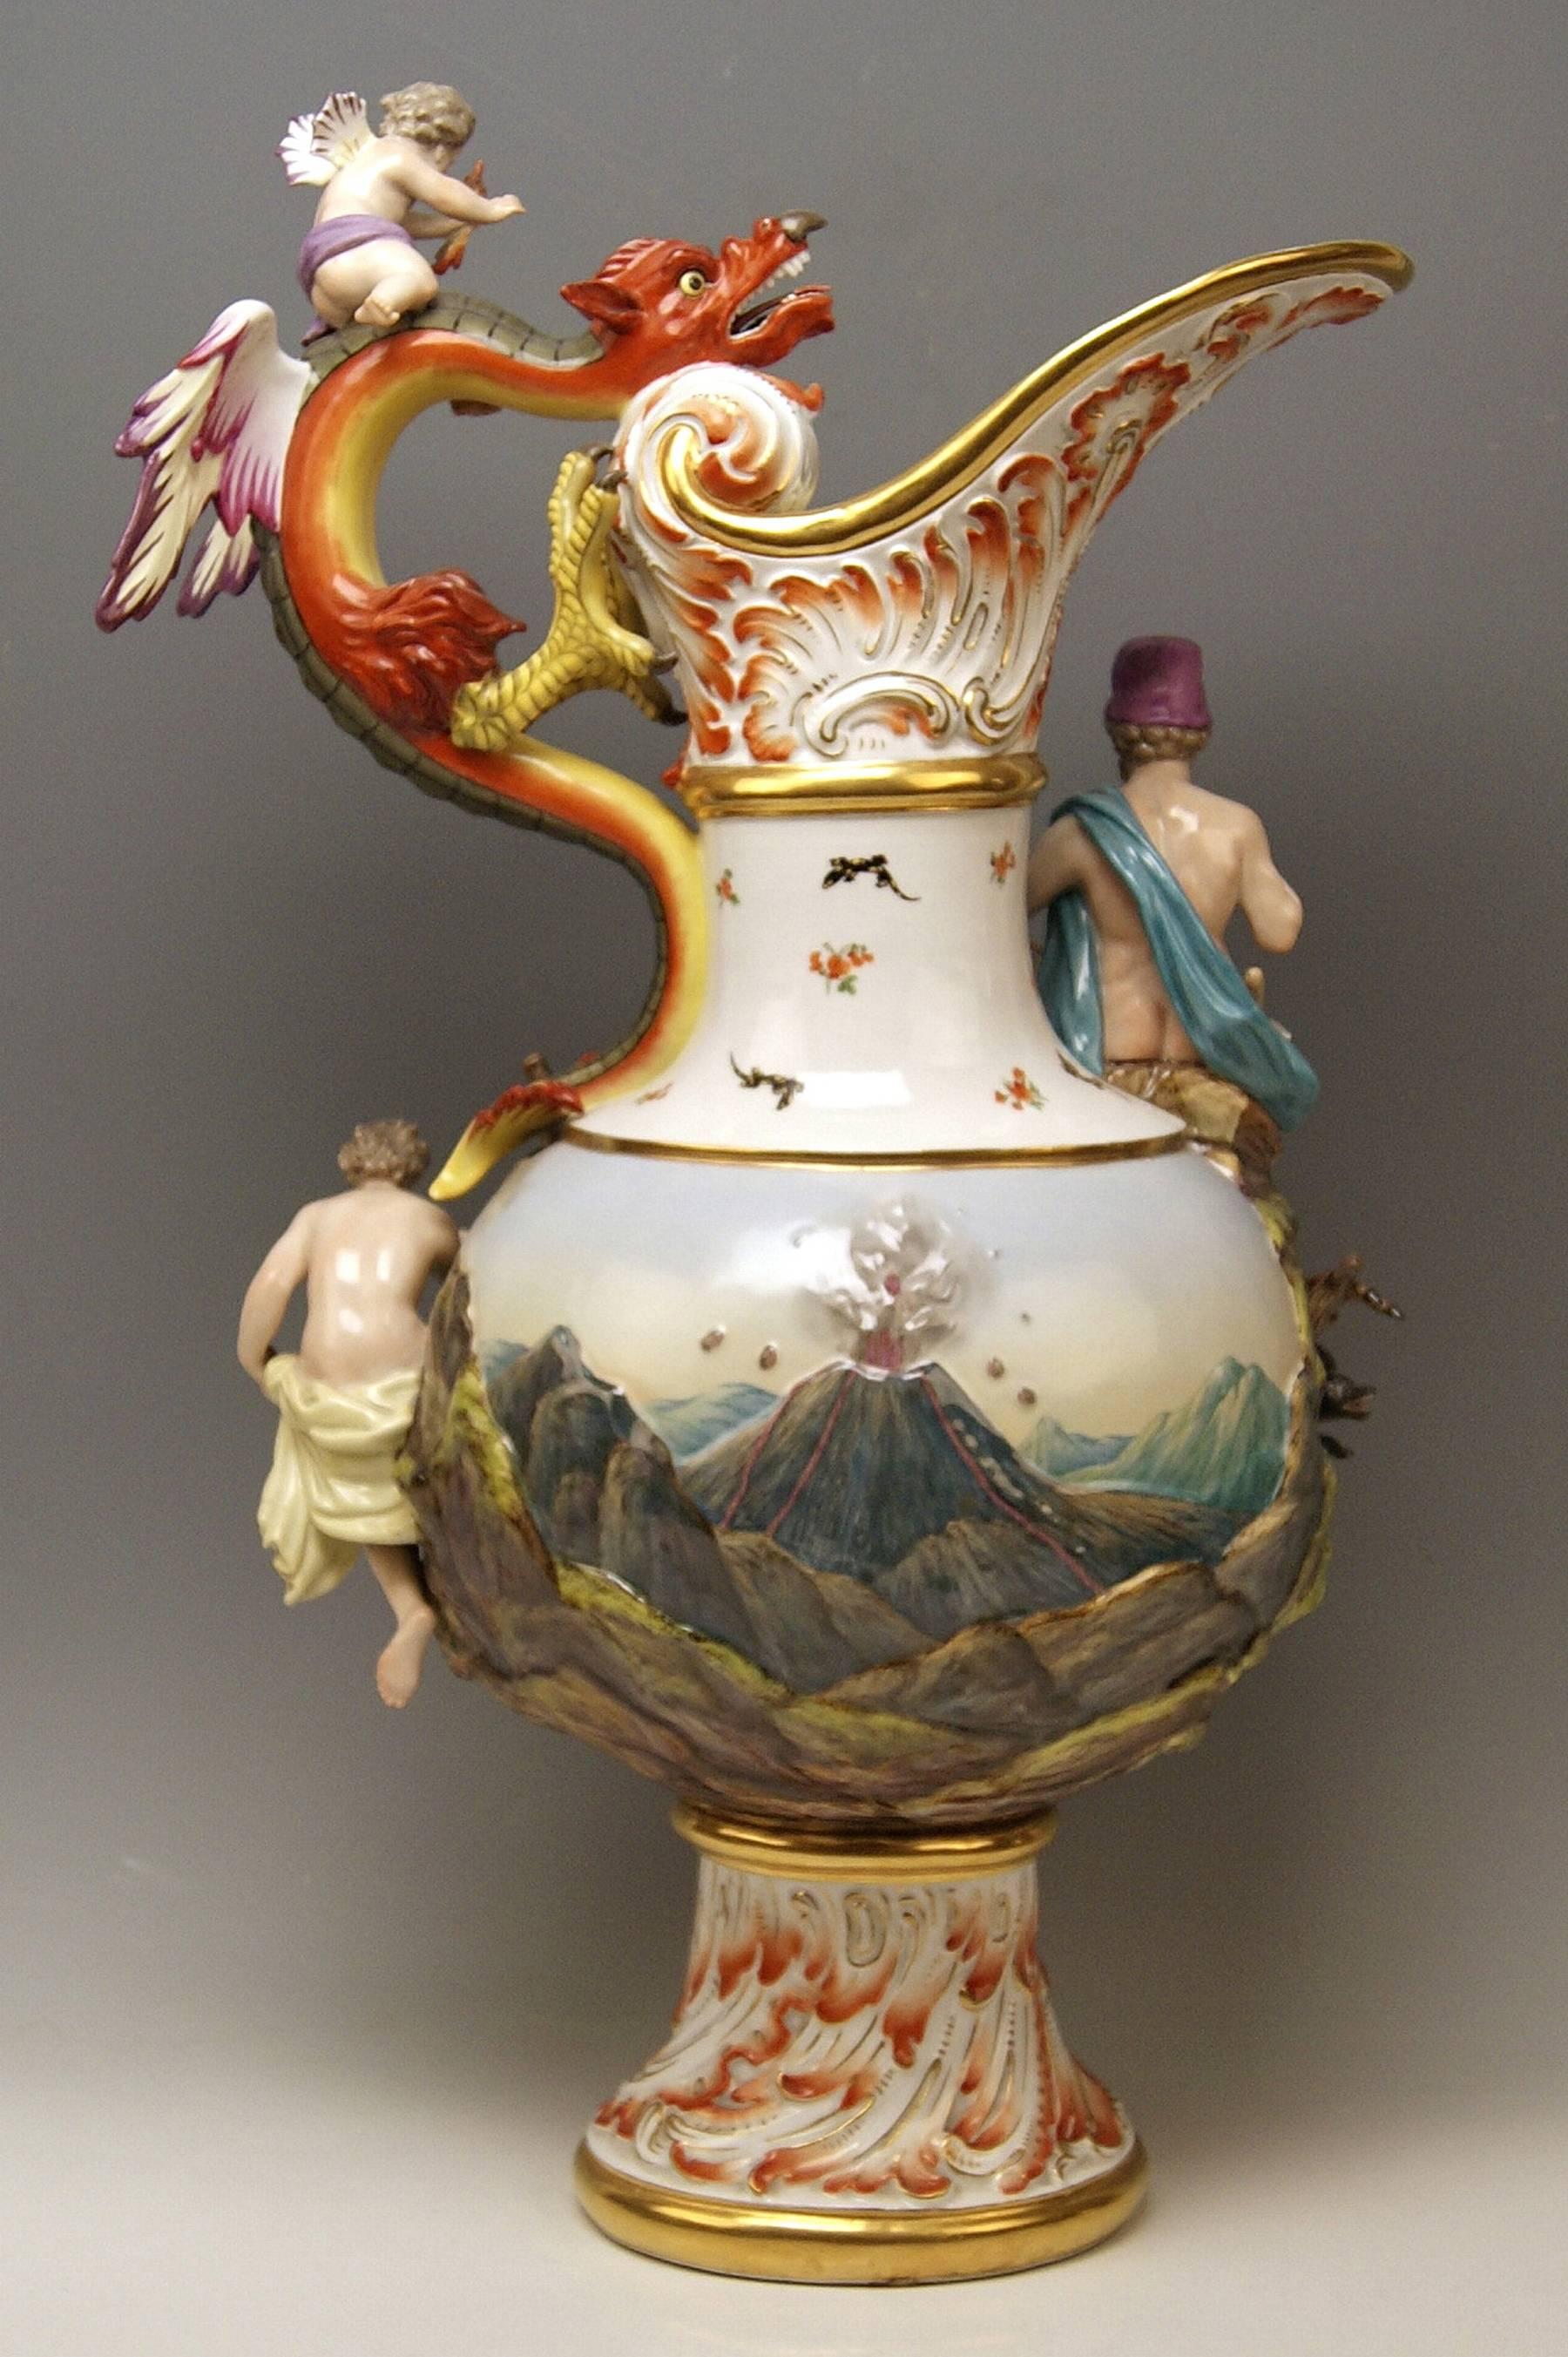 Baroque MEISSEN HUGE EWER THE FIRE FOUR ELEMENTS BY KAENDLER height 26.18 inches c.1860